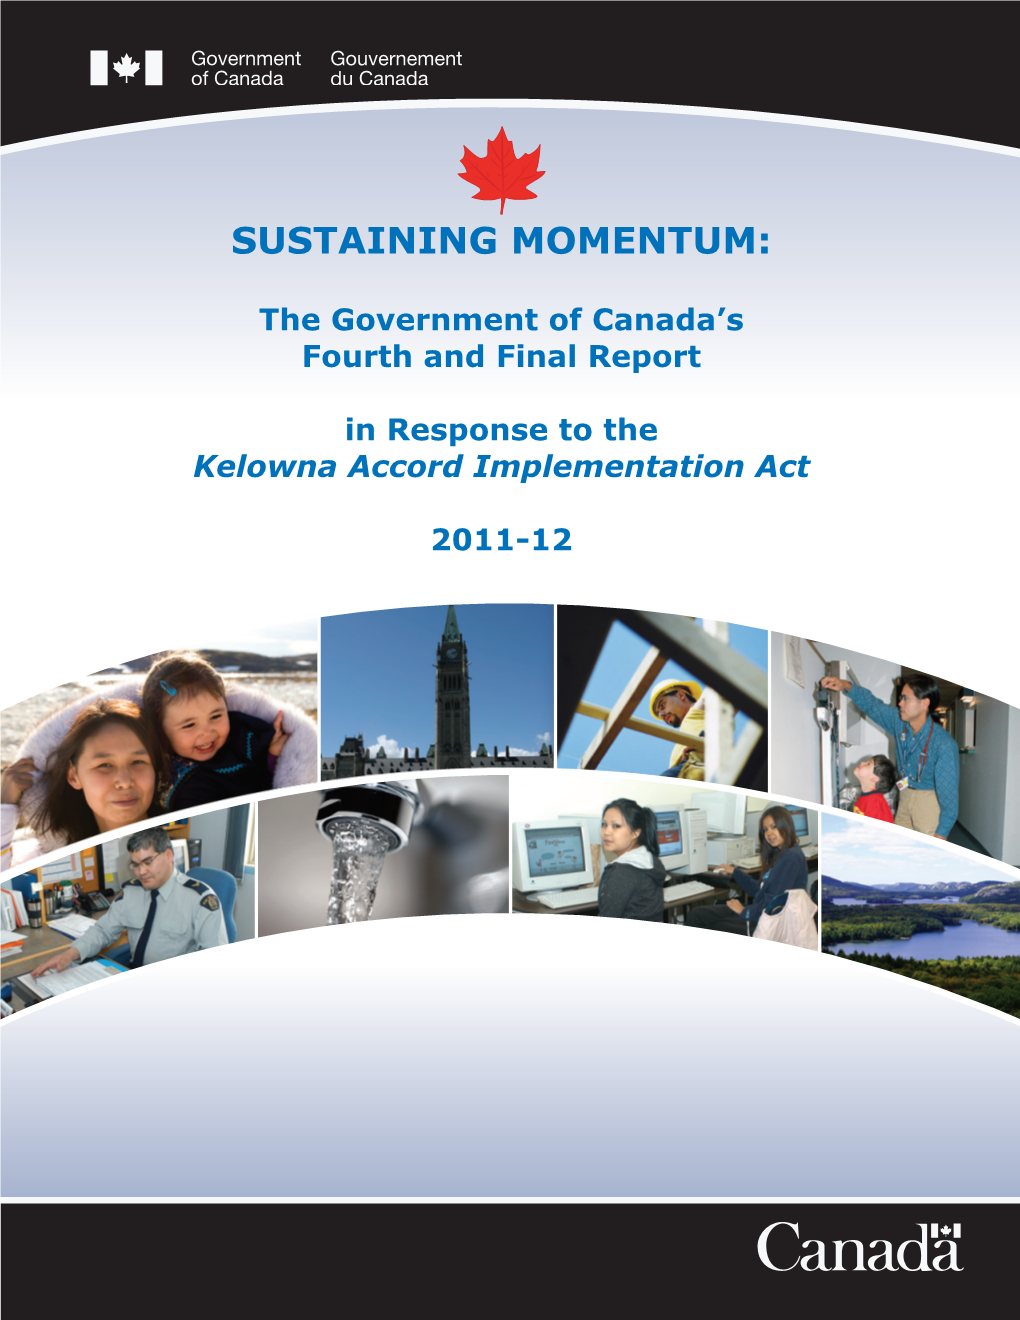 The Government of Canada's Fourth and Final Report in Response To